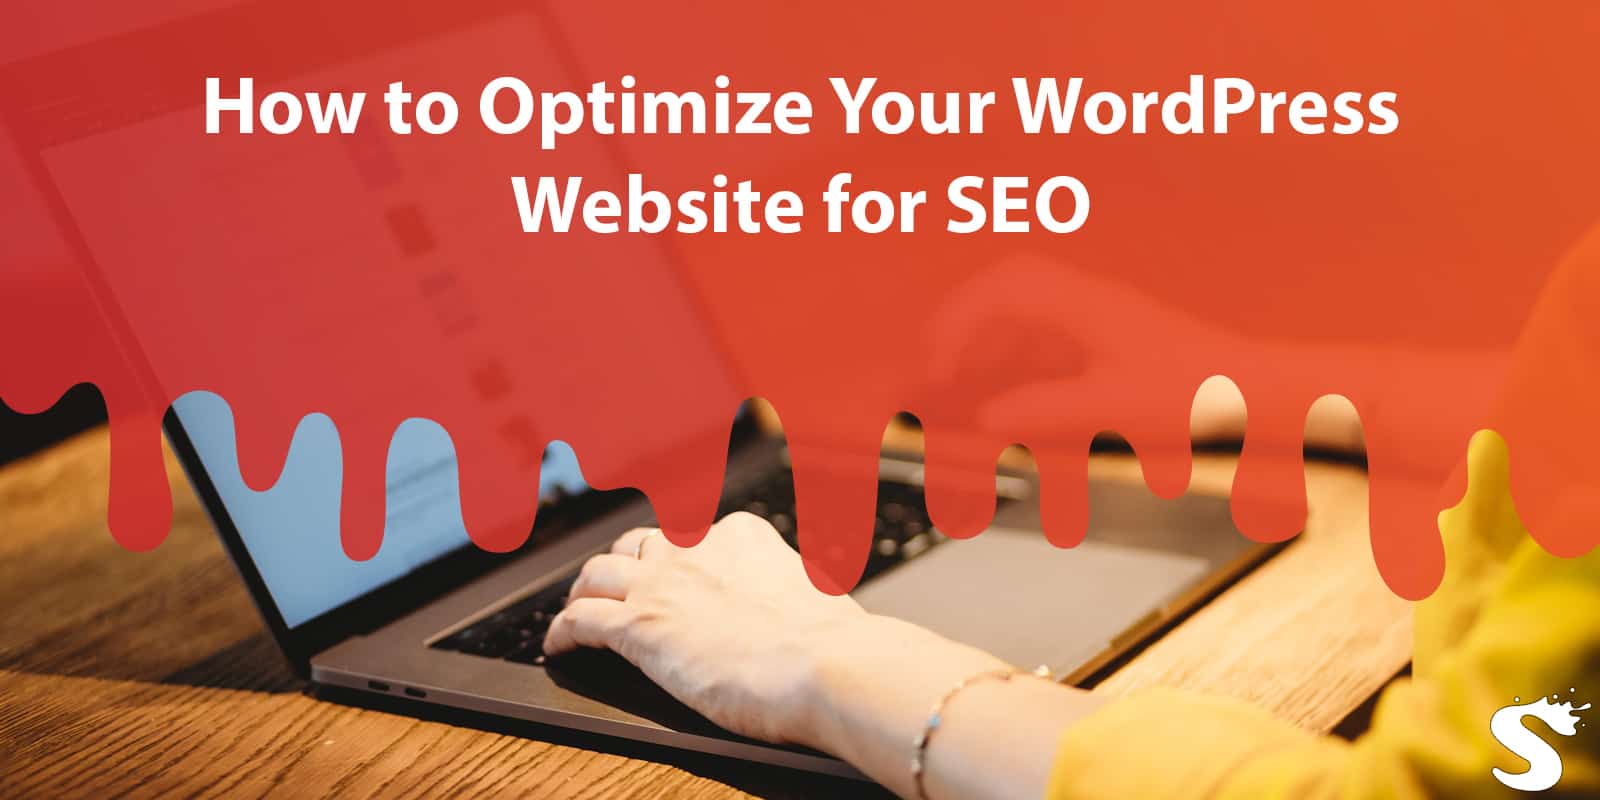 How to Optimize Your WordPress Website for SEO